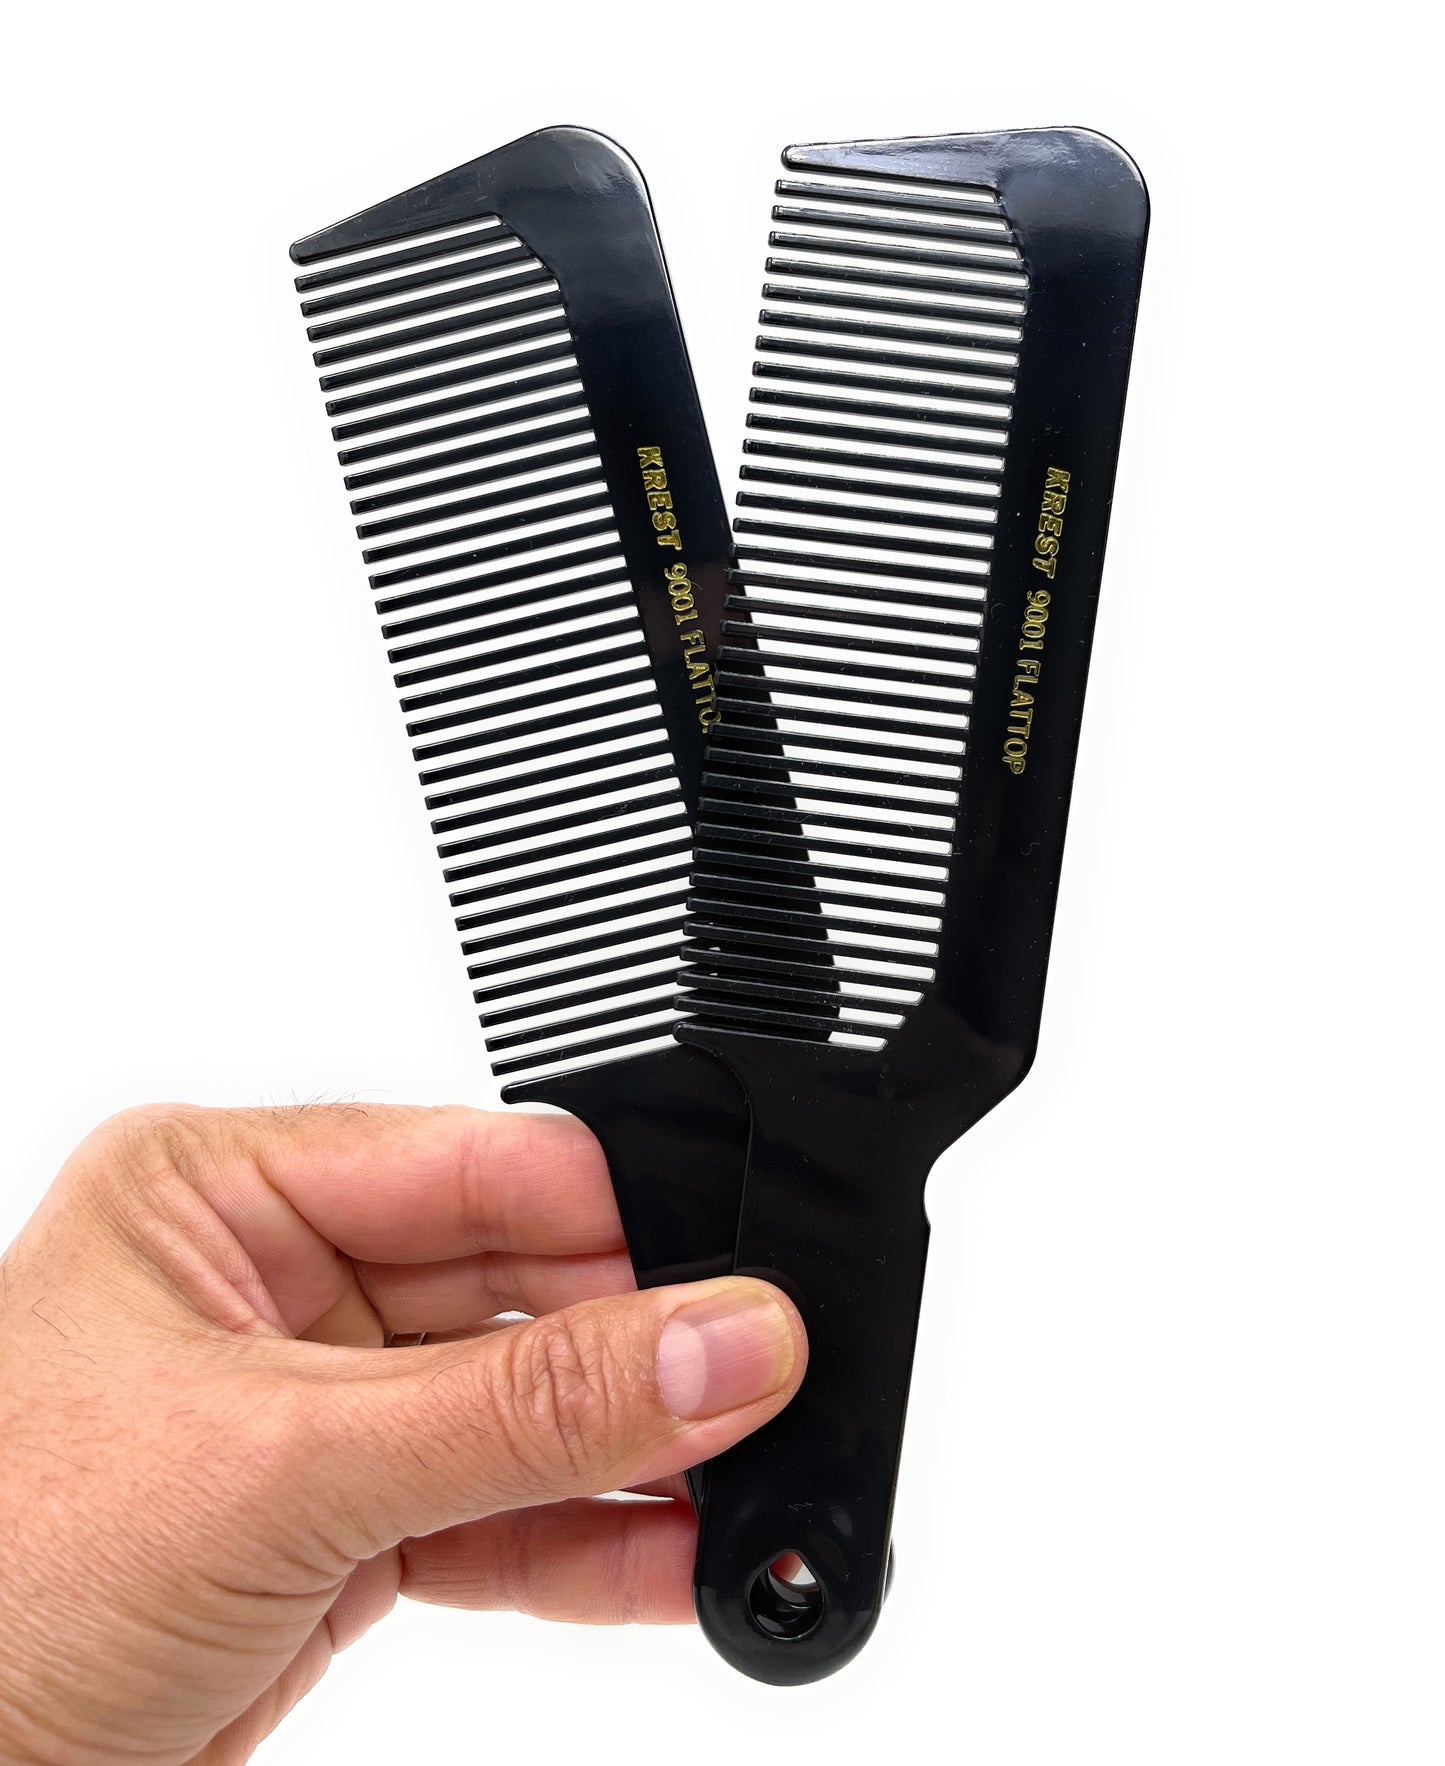 Krest 9001 Clipper 8.5 In.  Flat Top Comb Blending Hair Cutting Barber Stylist Made In The USA 2 Pc.